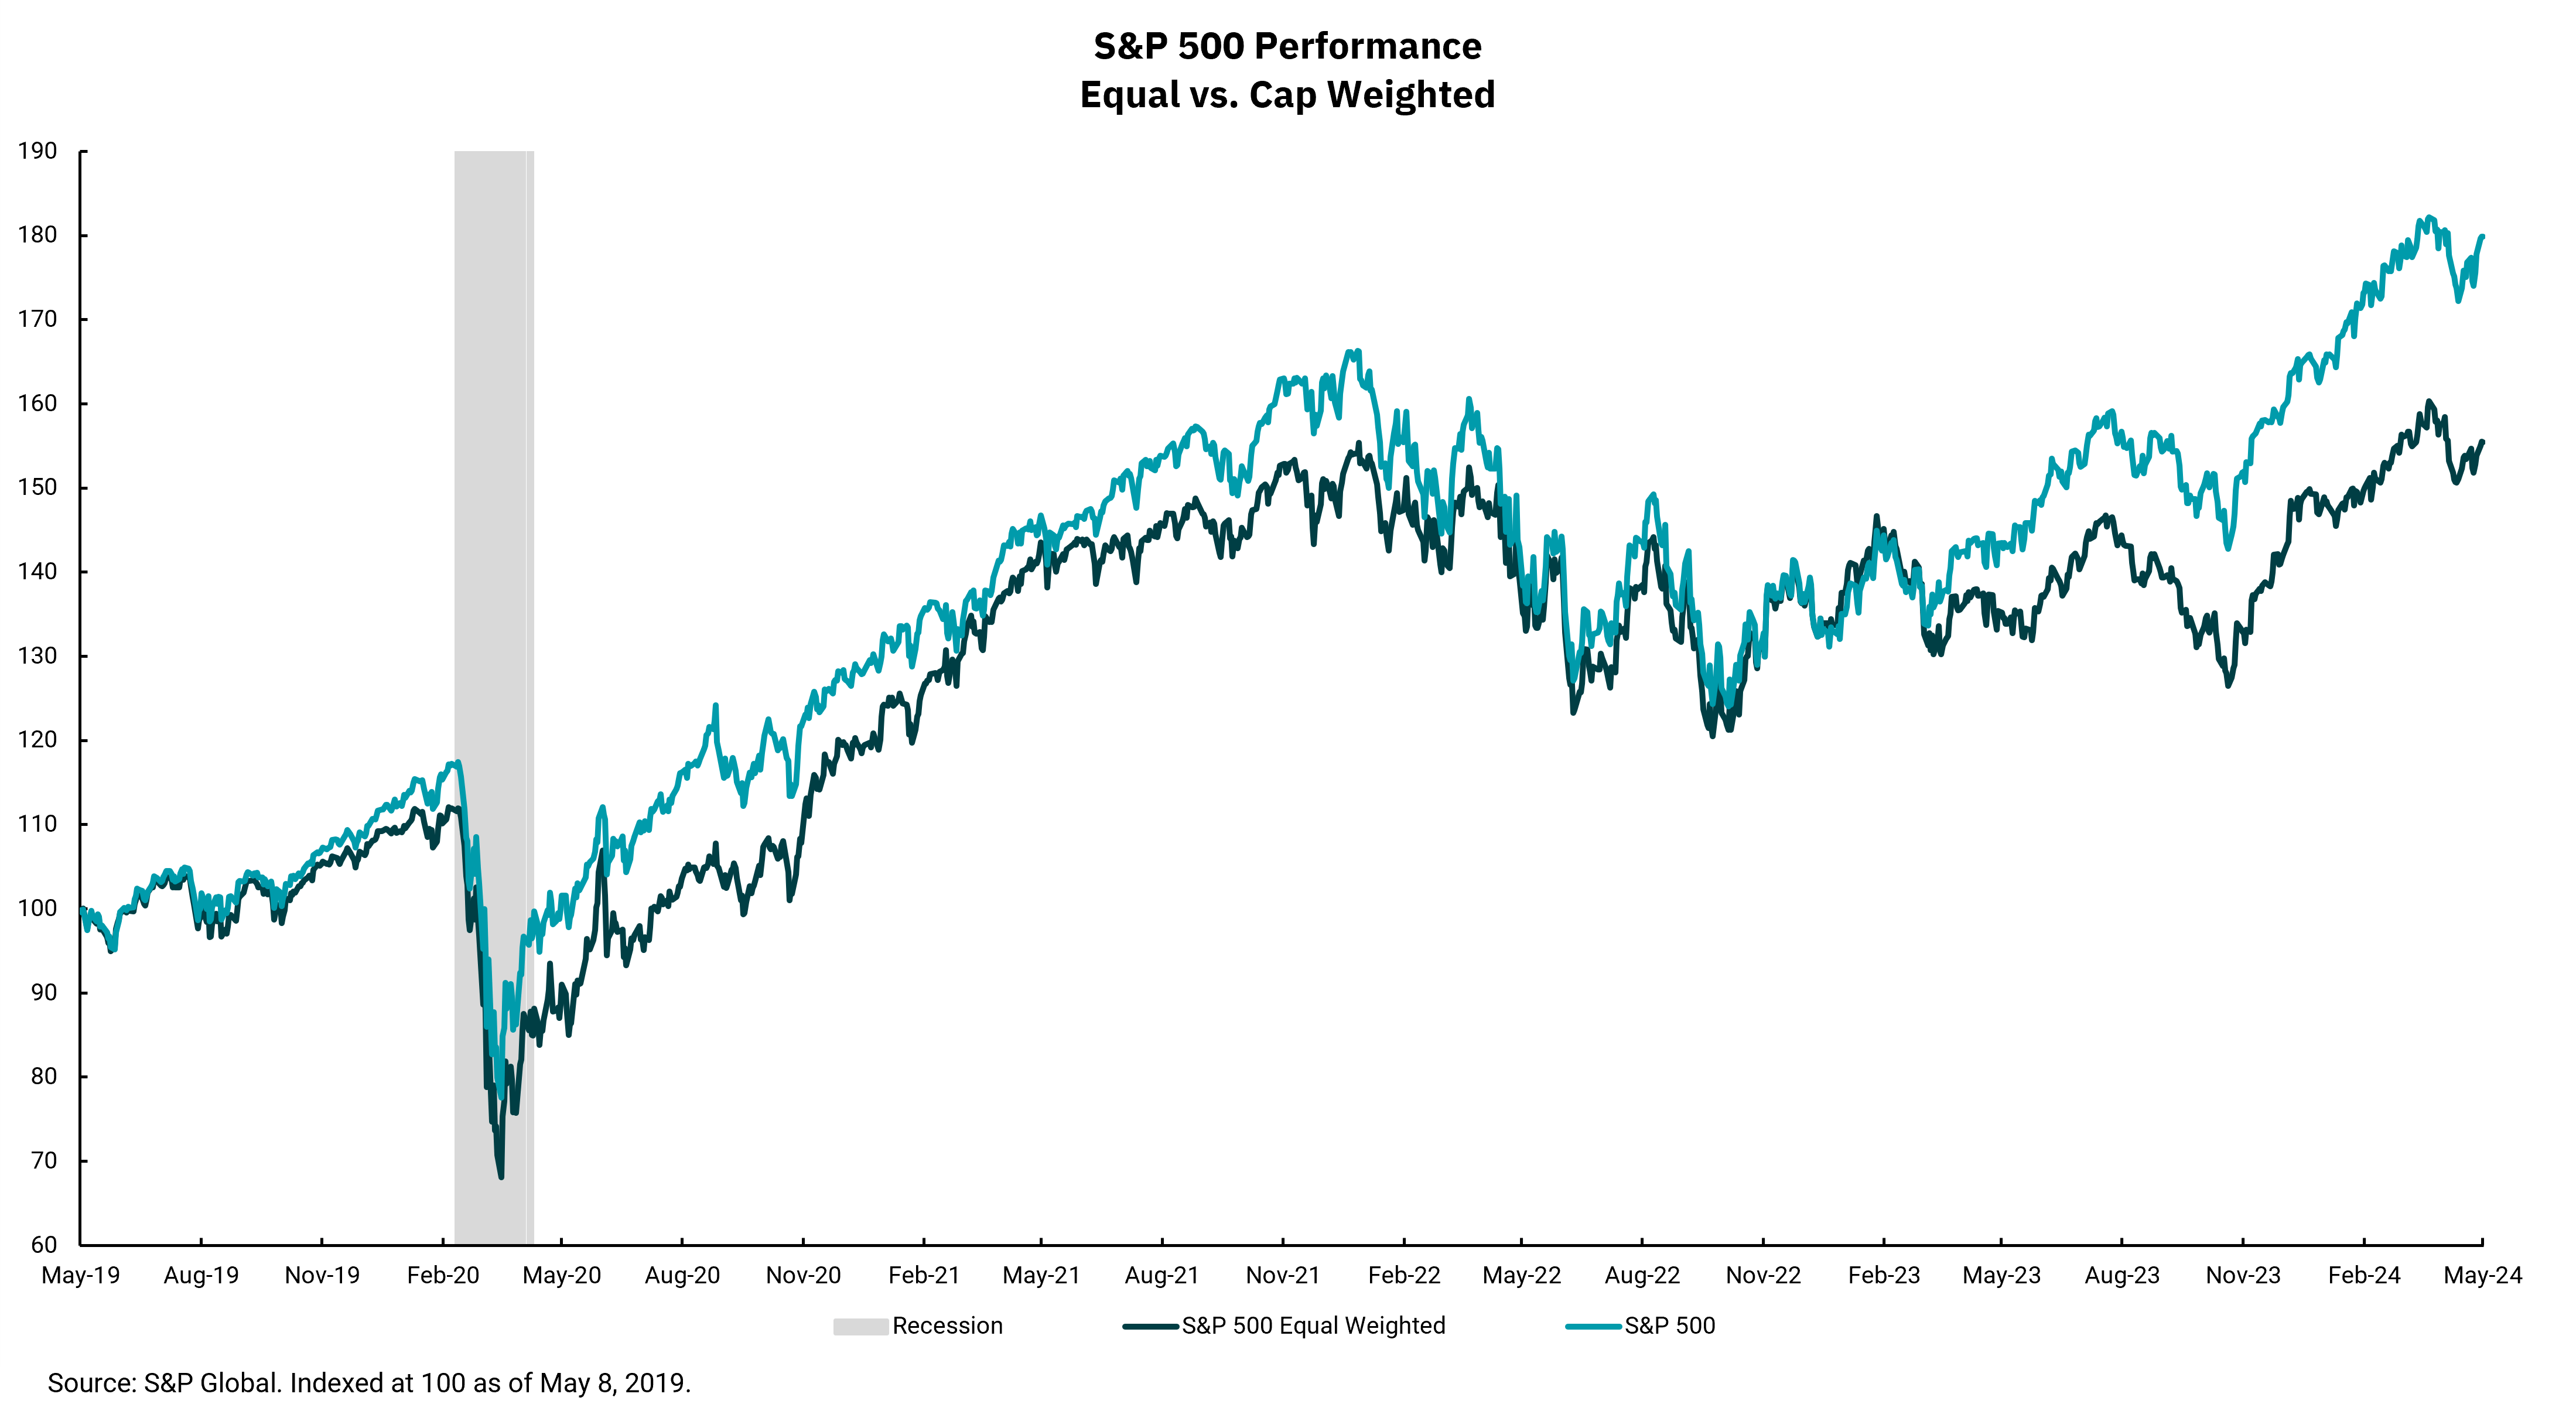 S&P 500 Performance Equal vs. Cap Weighted